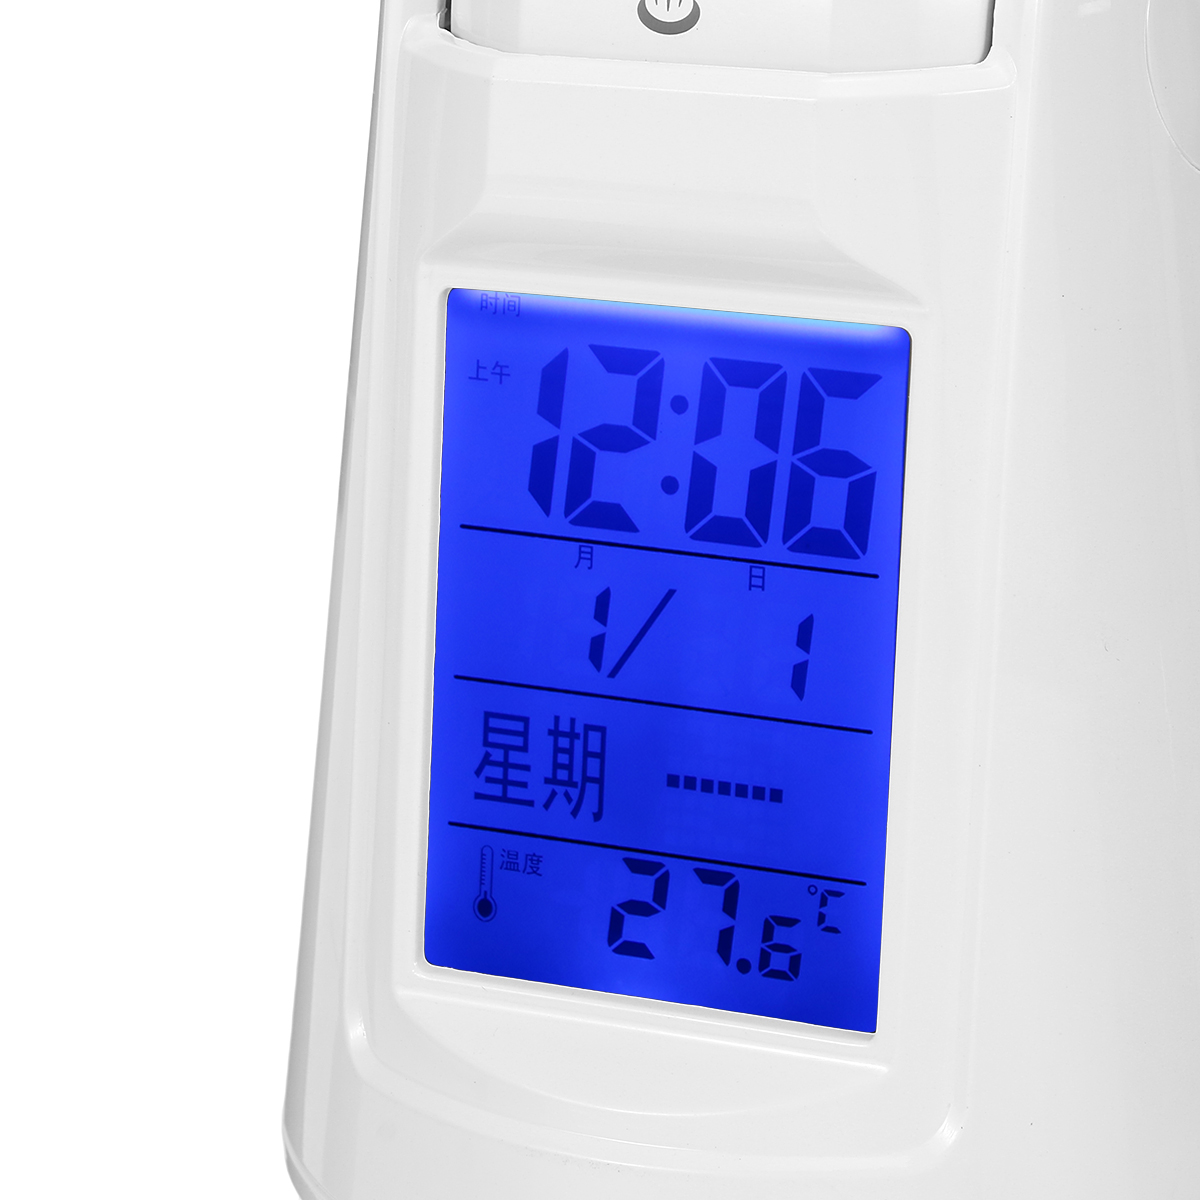 LED-Projection-Alarm-Clock-Thermometer-Snooze-Voice-Timing-Nightlight-Kids-Wake-1709073-8